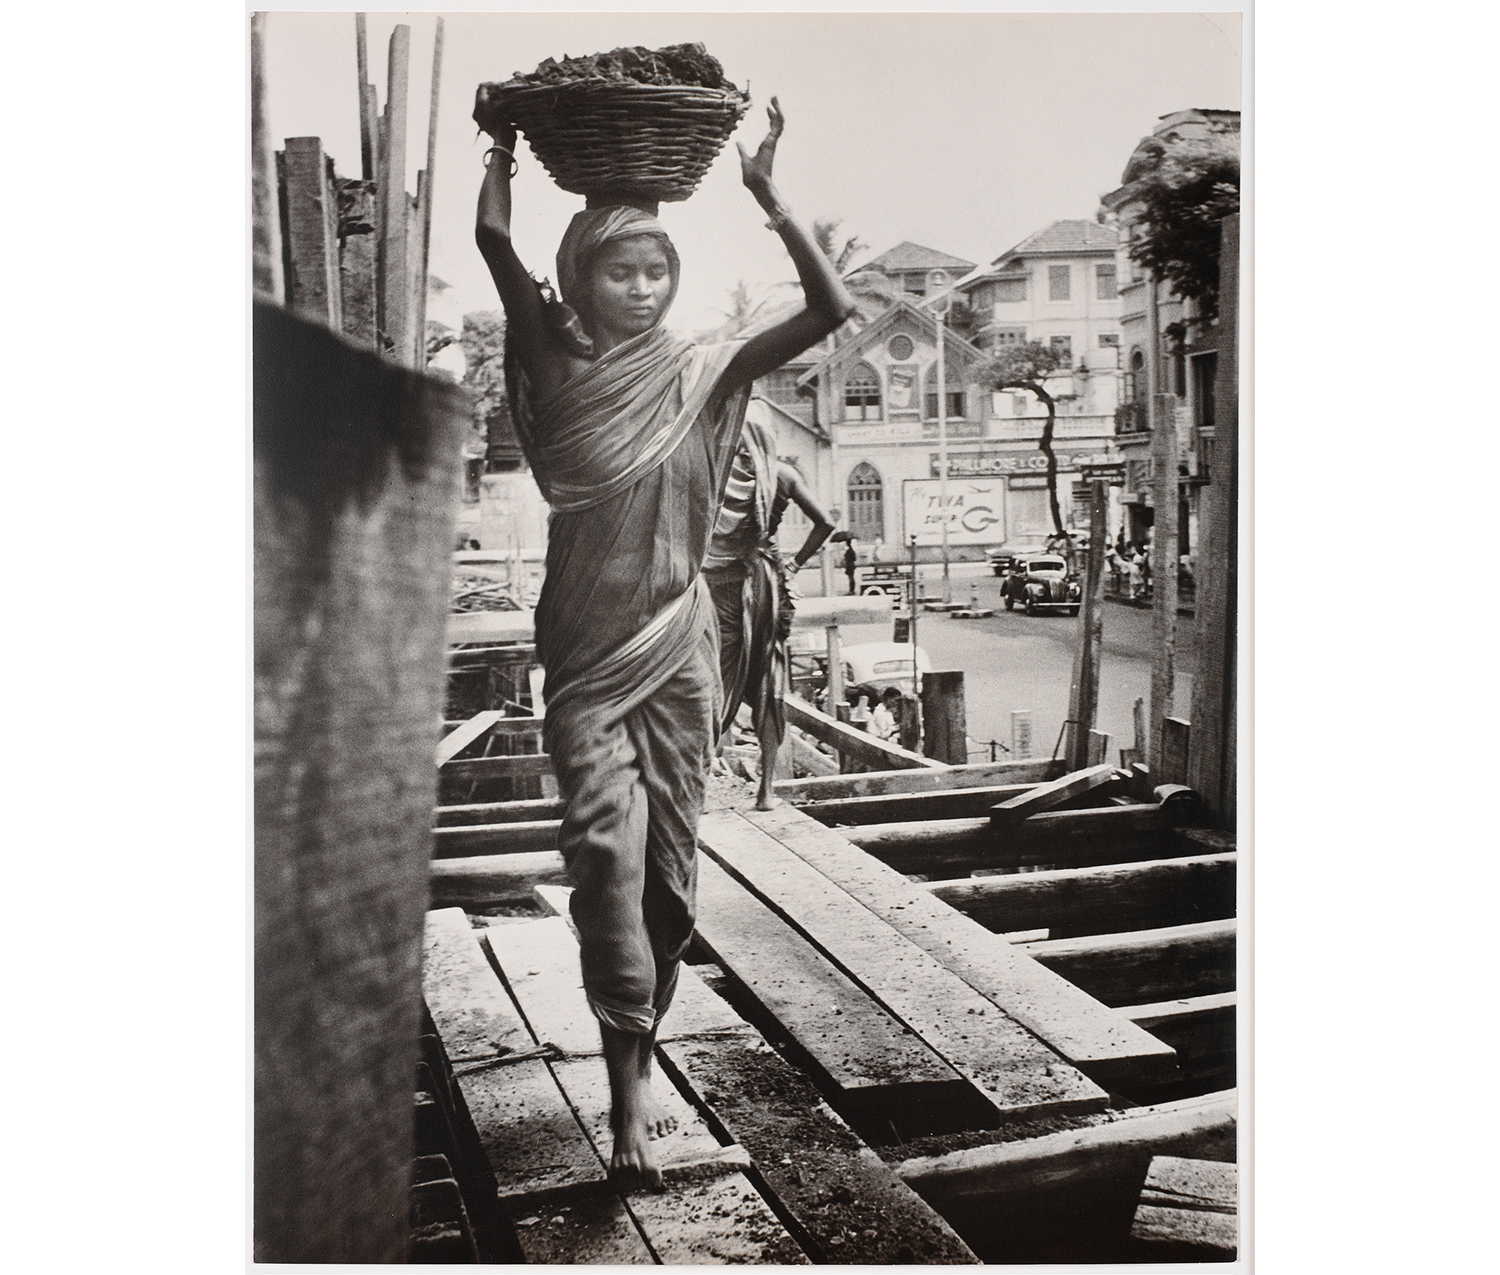 young person walking on a construction site, carrying a basket on their head